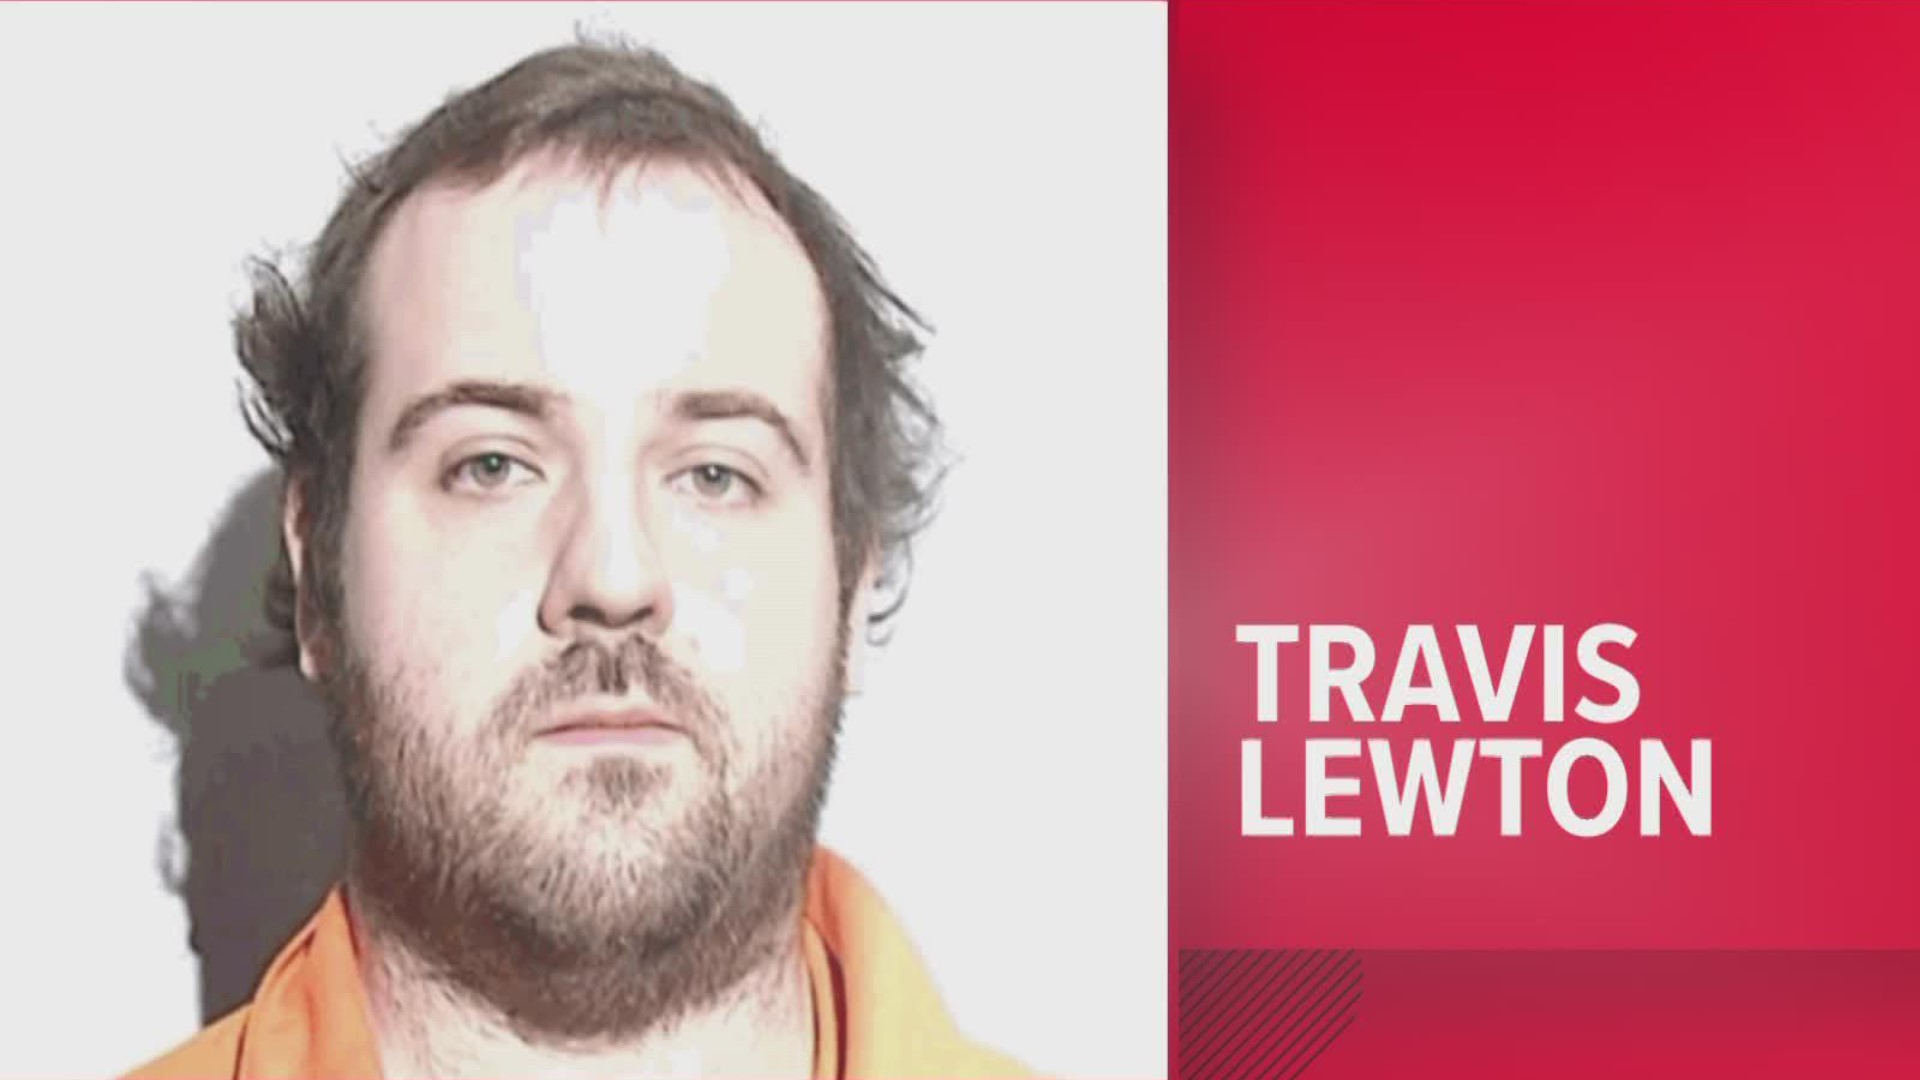 Travis Lewton told police he killed his mother by choking her and then tried to dispose of her body behind their south Toledo home, according to court documents.